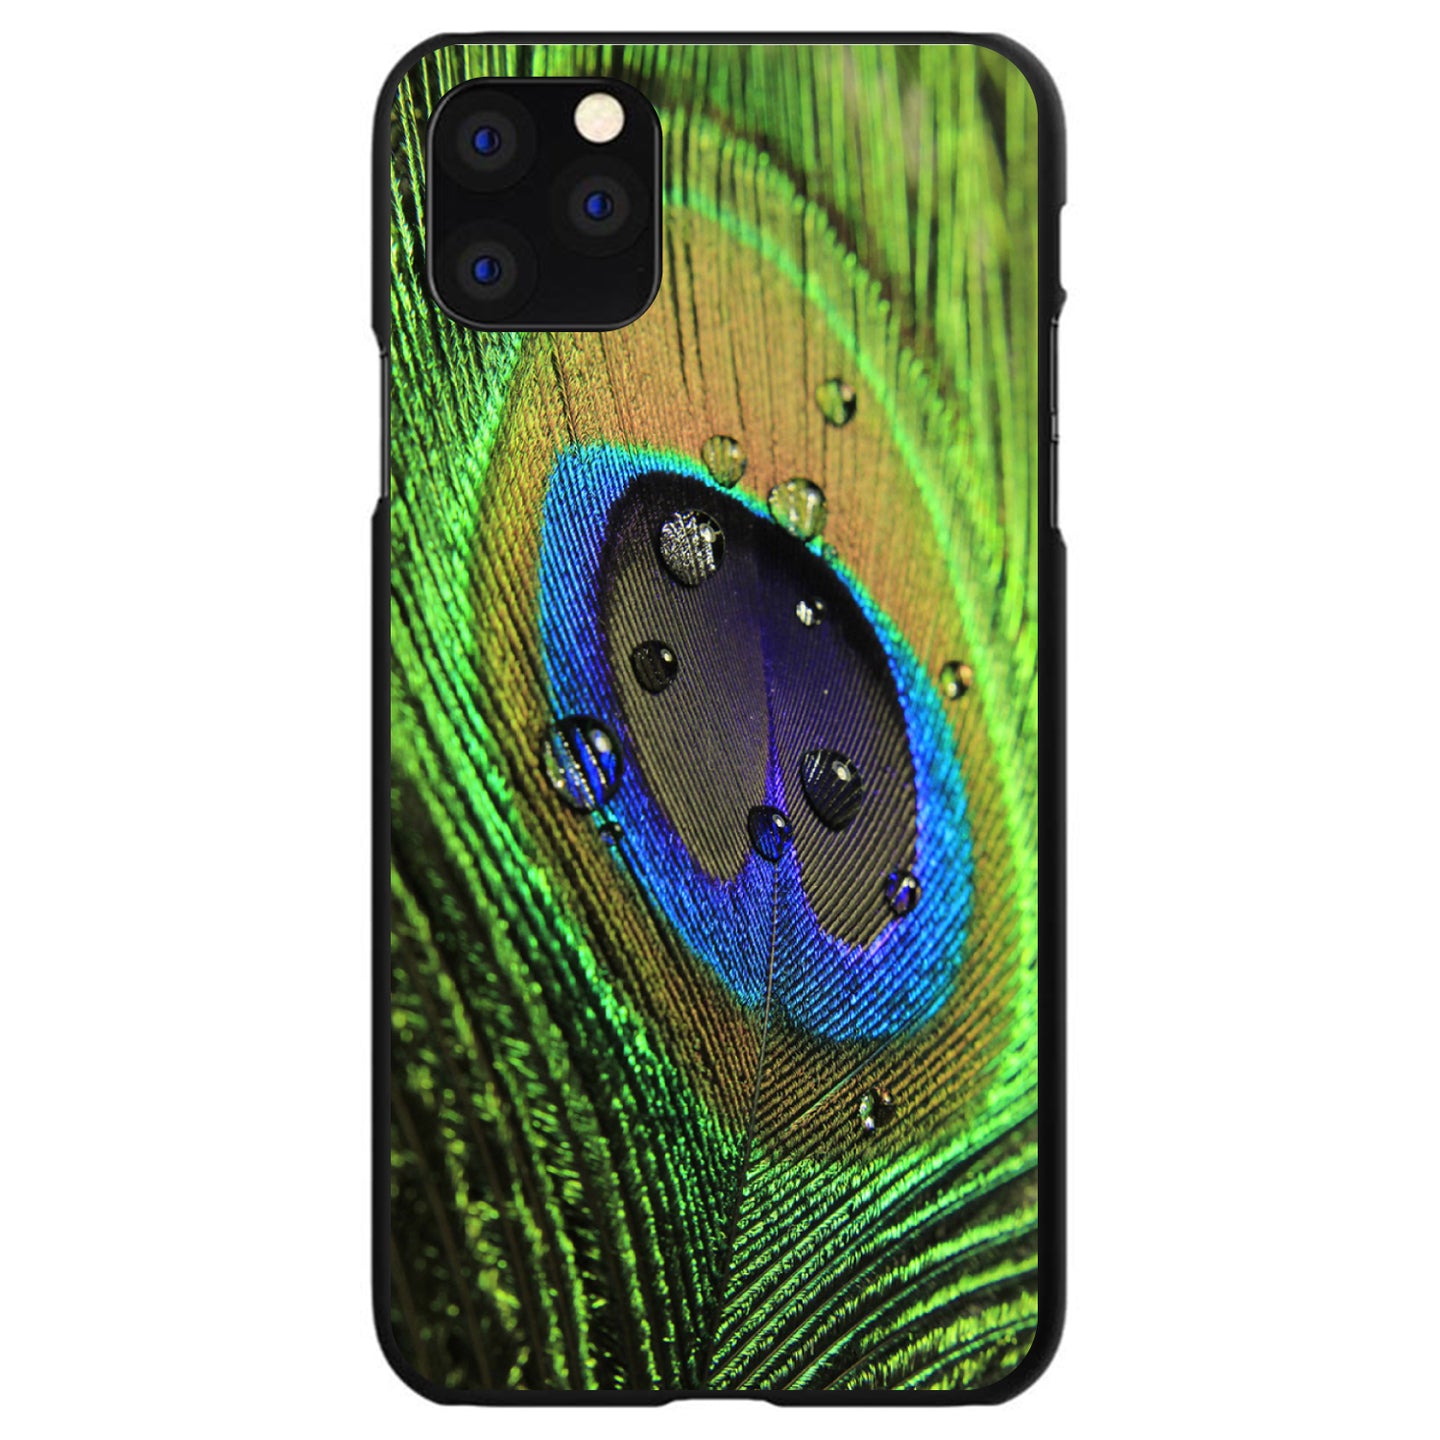 DistinctInk® Hard Plastic Snap-On Case for Apple iPhone or Samsung Galaxy - Peacock Feather Close Up